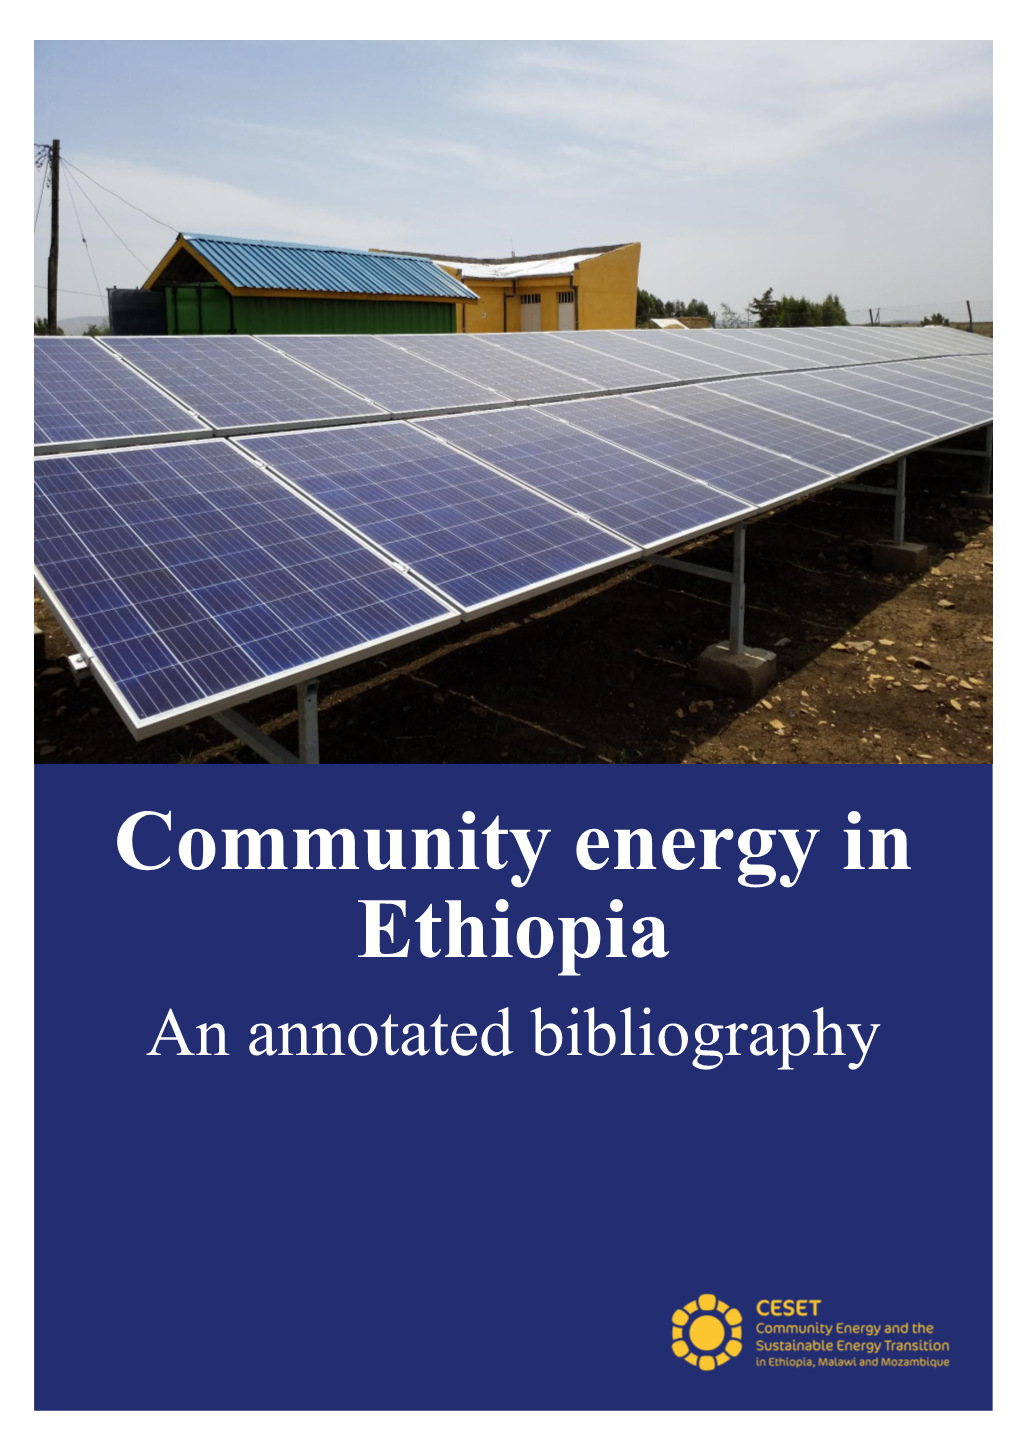 Community Energy in Ethiopia an Annotated Bibliography